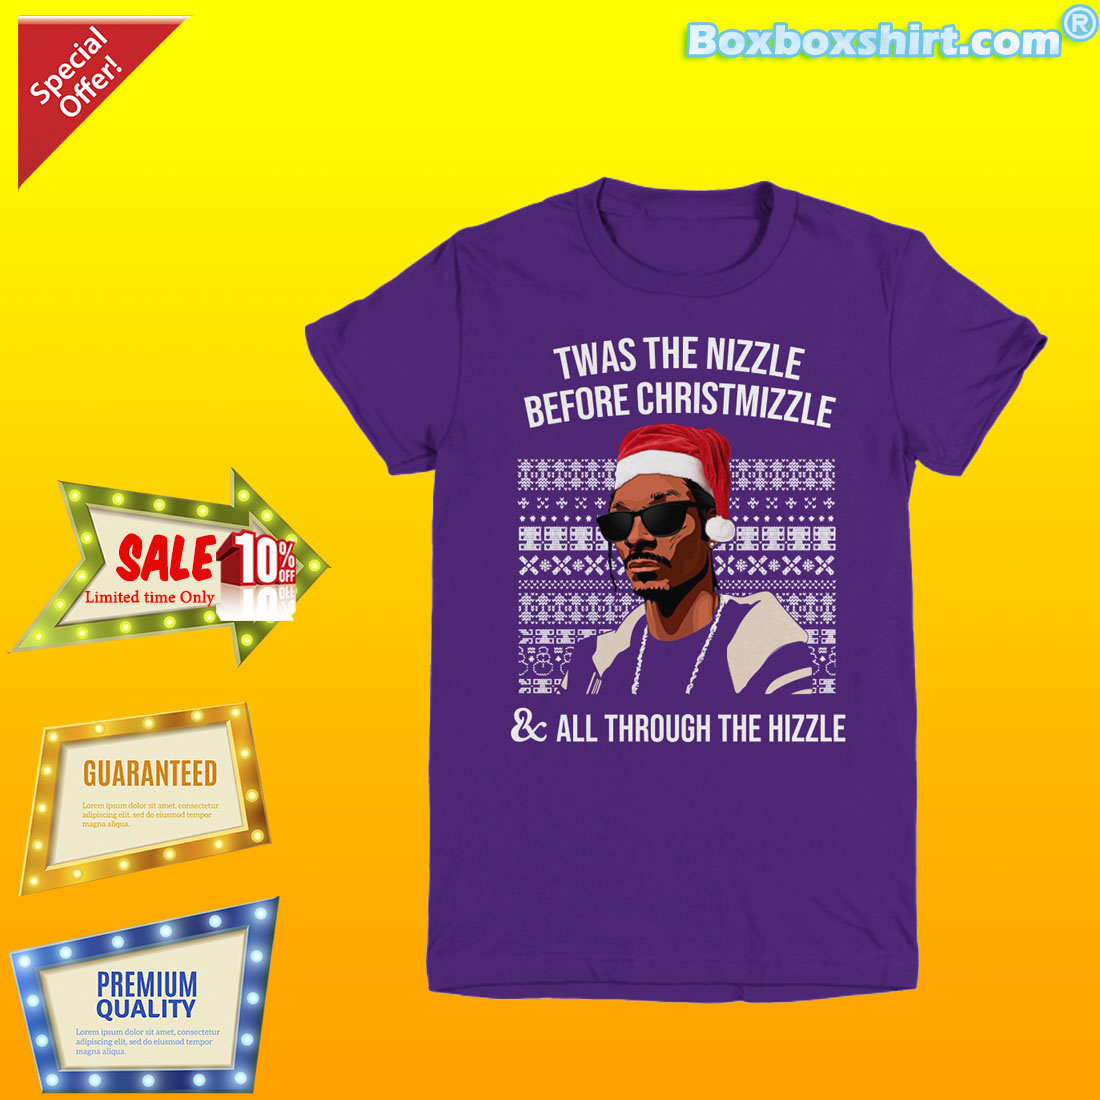 Twas the nizzle before christmizzle and all through the hizzle ugly Christmas sweater shirt